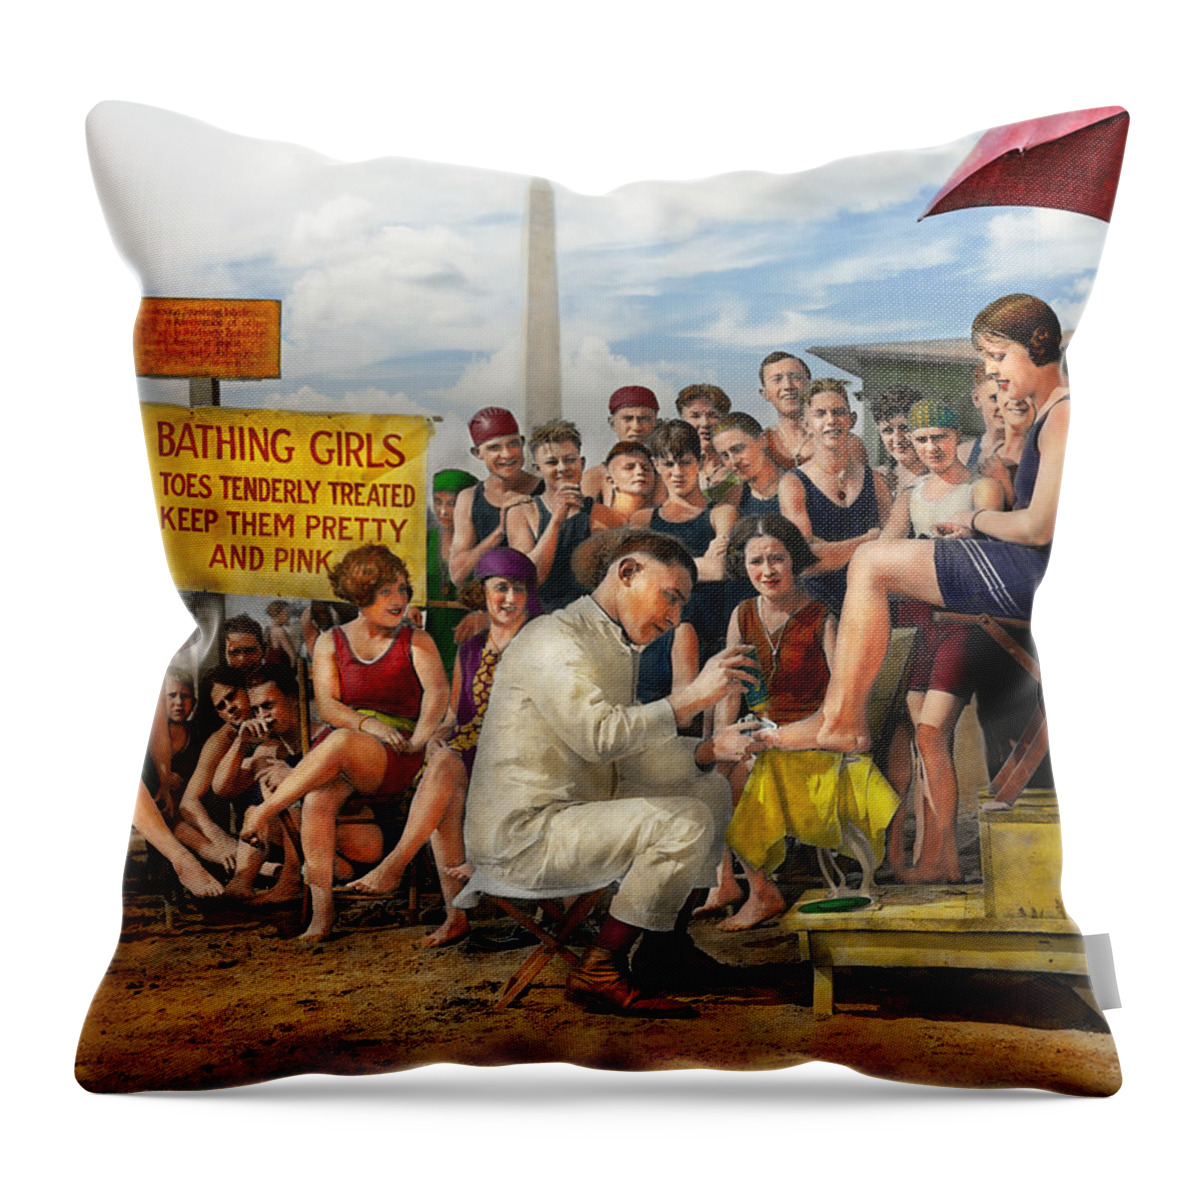 Feet Throw Pillow featuring the photograph Beach - Toes Tenderly Treated 1922 by Mike Savad